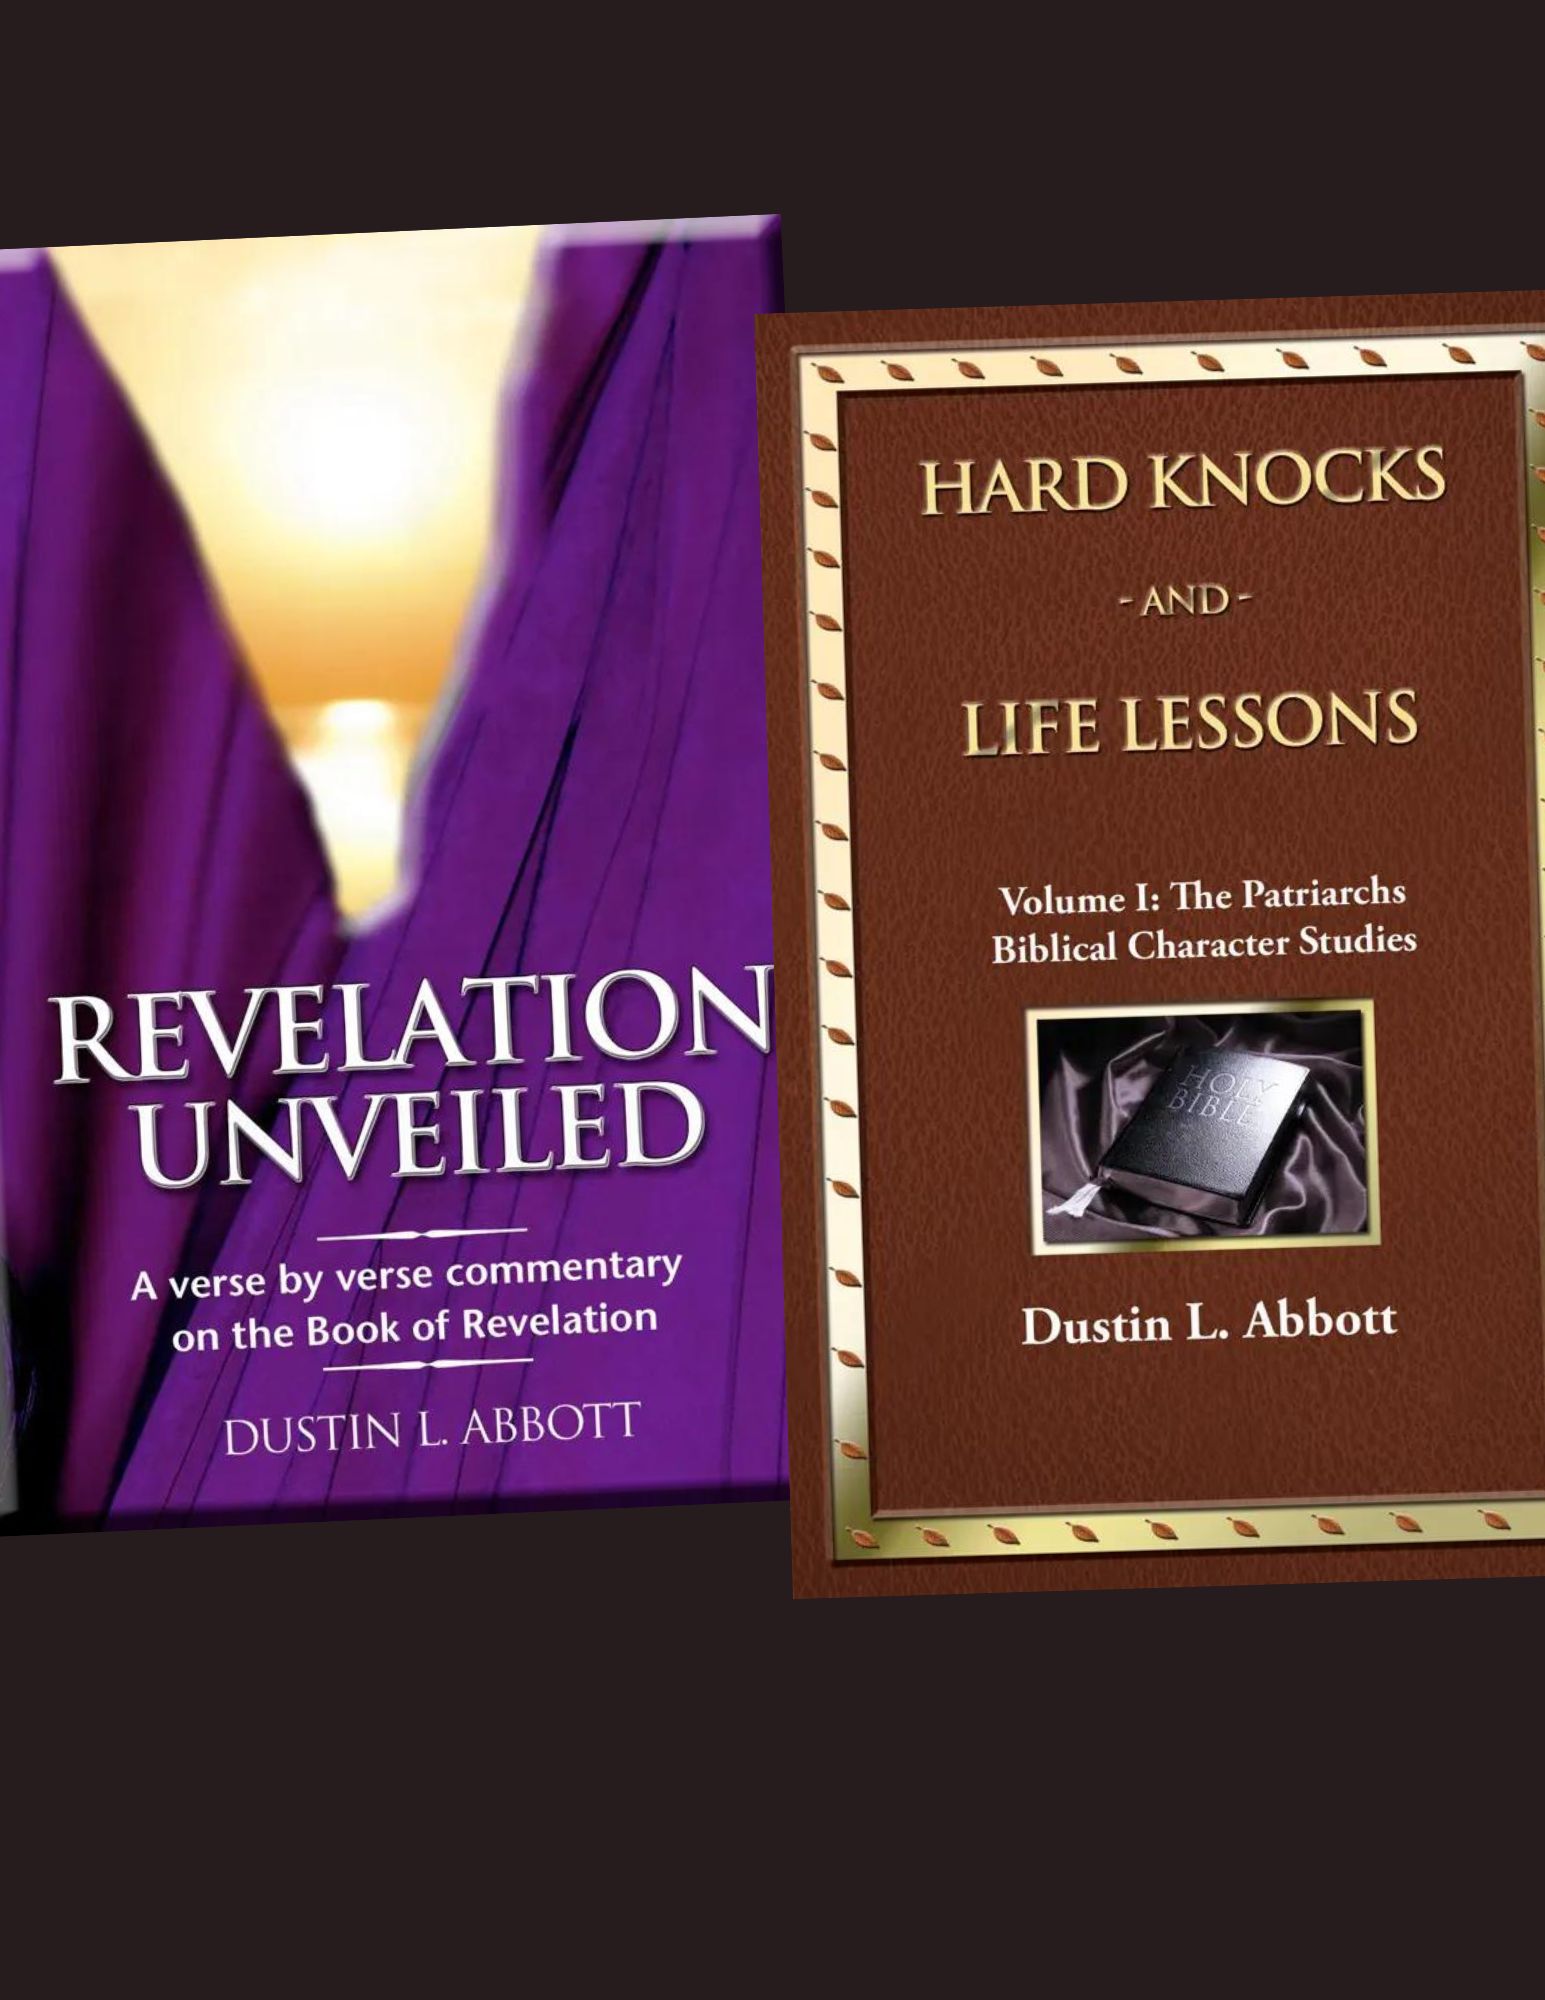 Revelation Unveiled and Hard Knocs And Life Lessons by Dustin Abbott